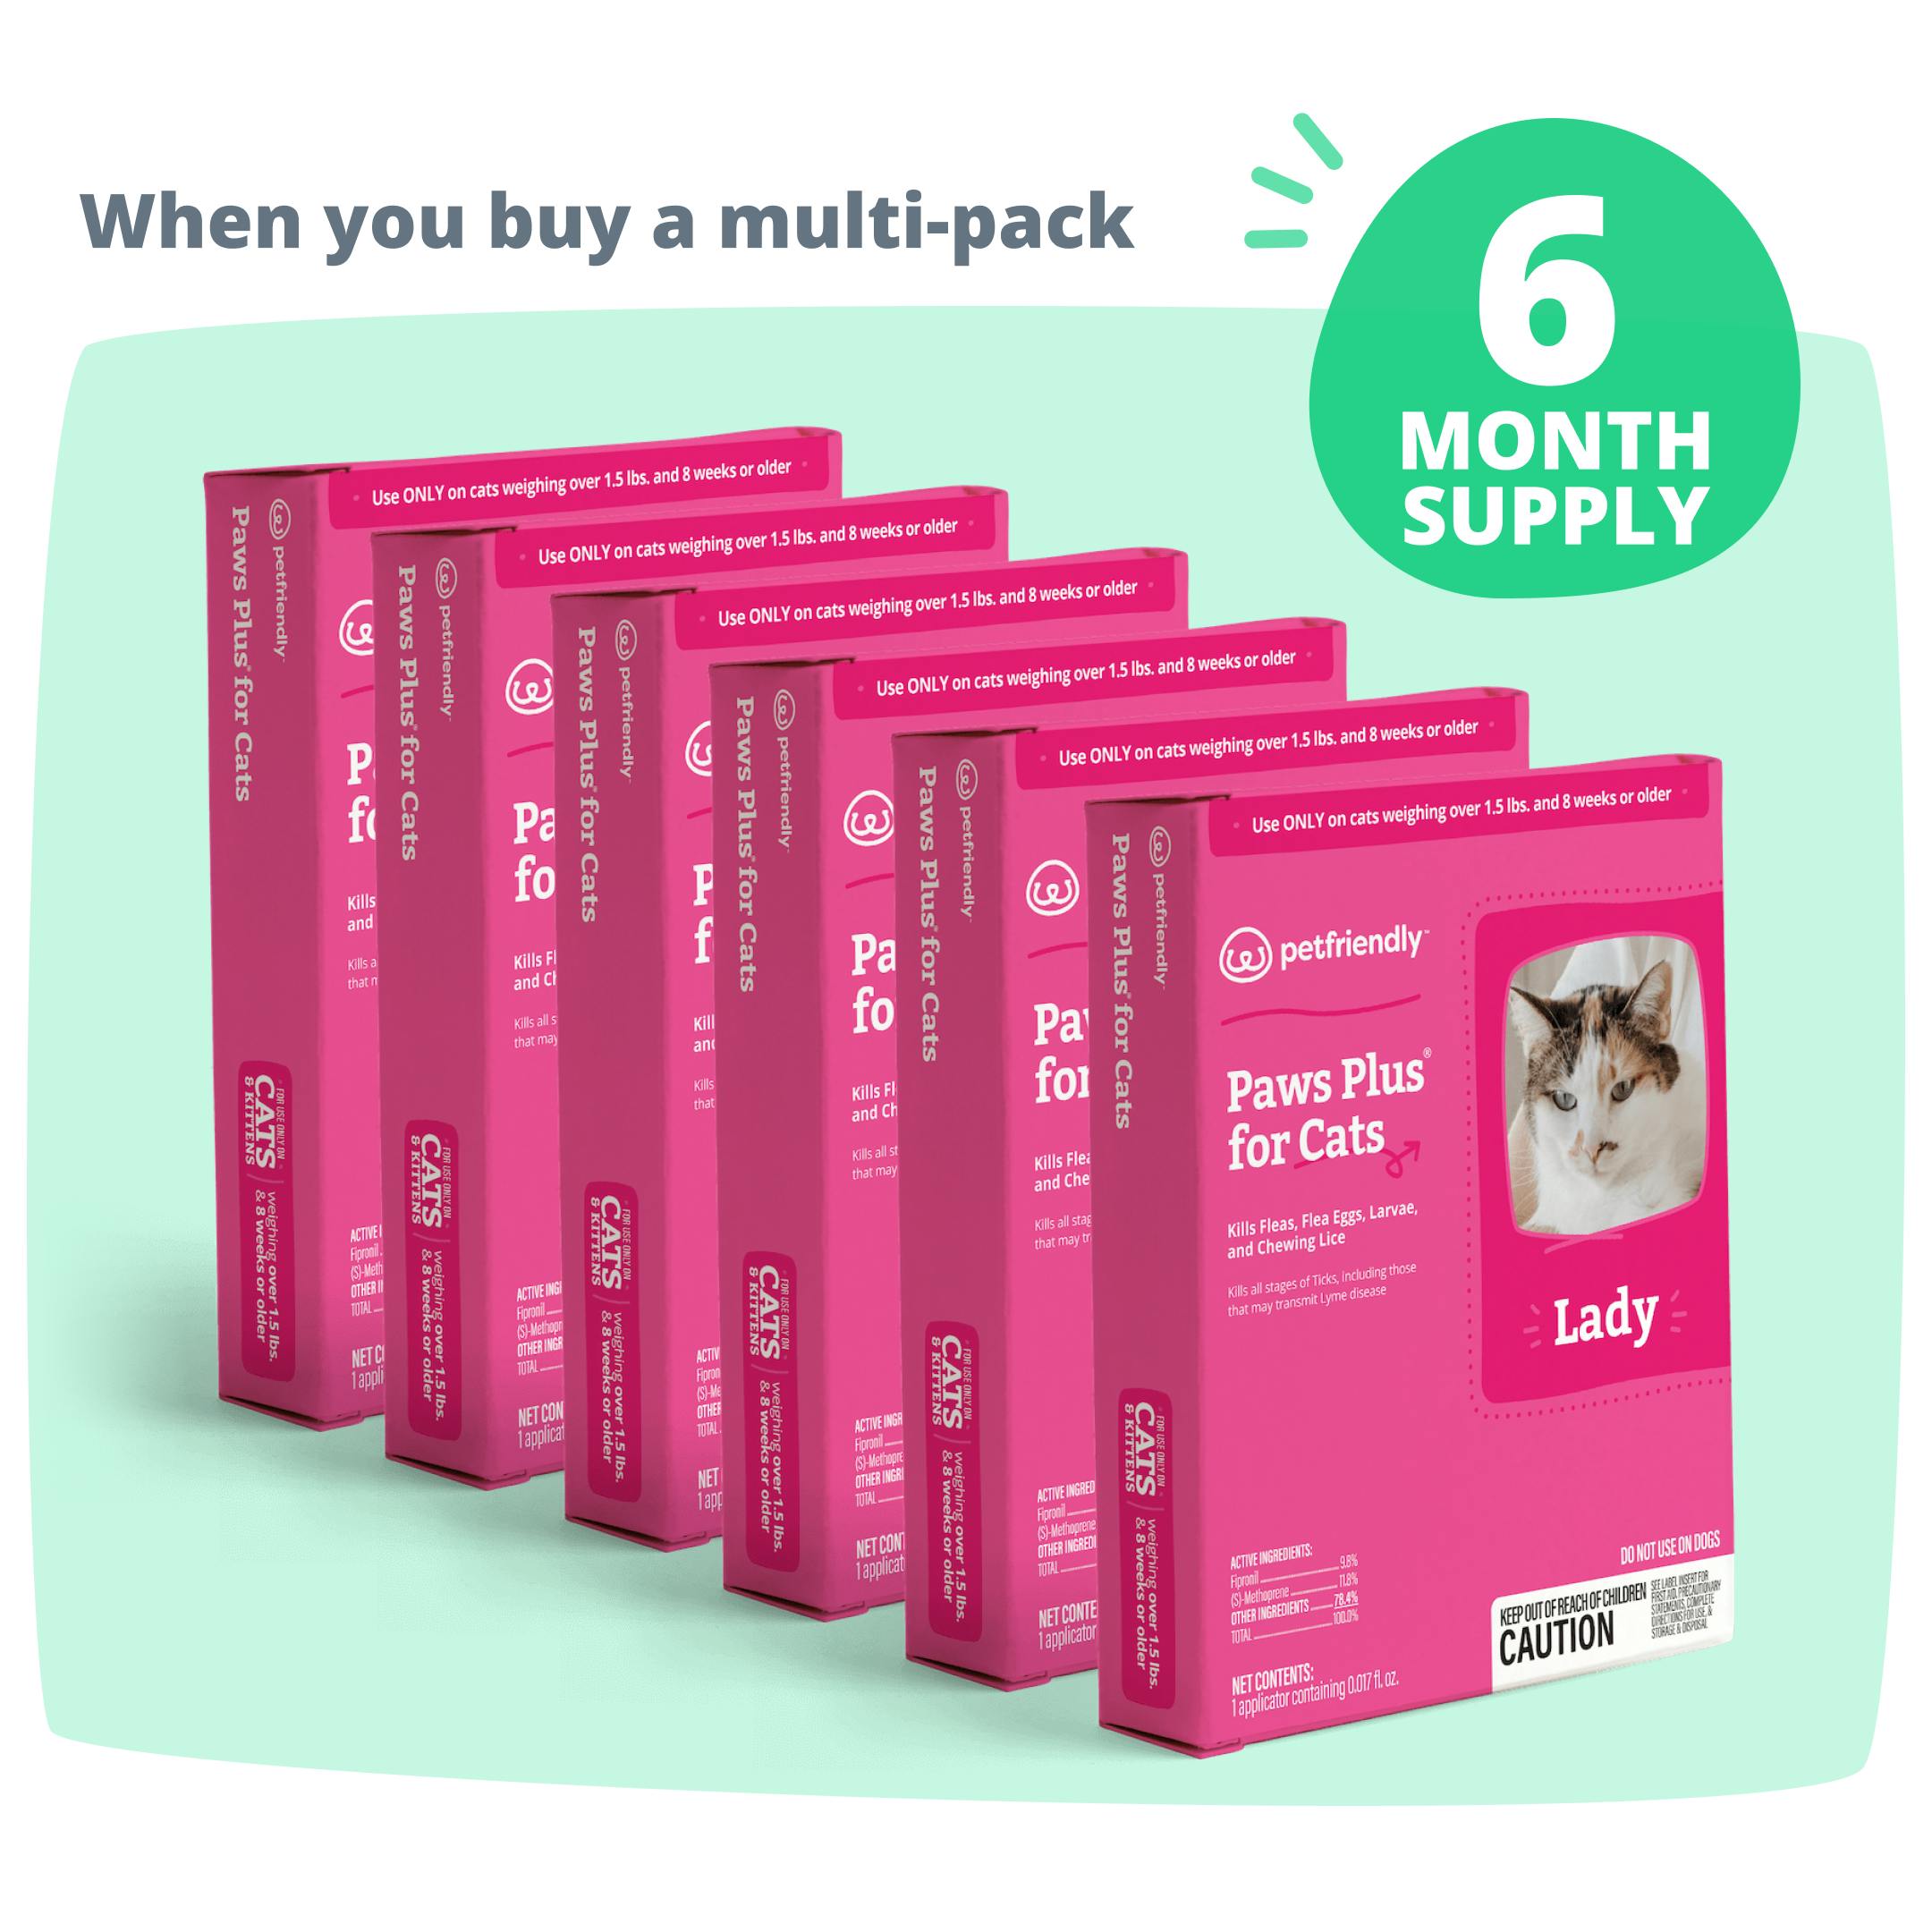 6-month supply of Paws Plus for Cats